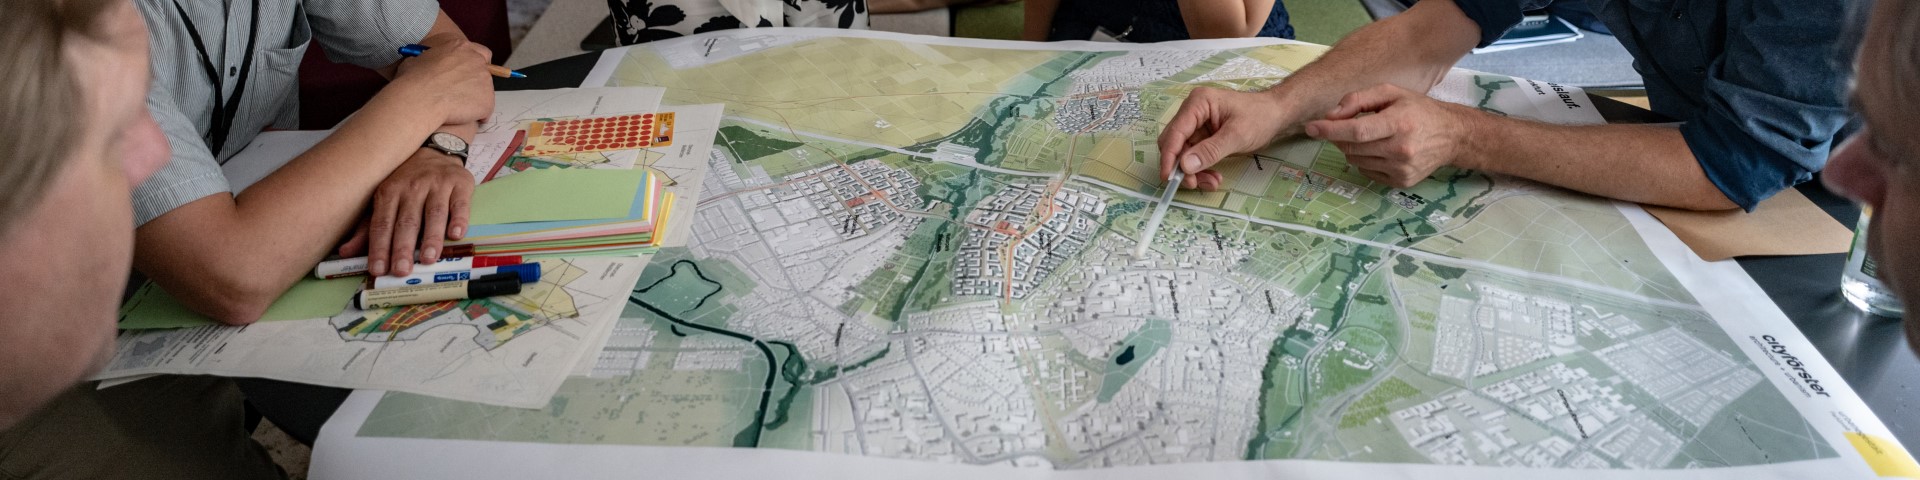 Several people sit around a city map and mark places on it.